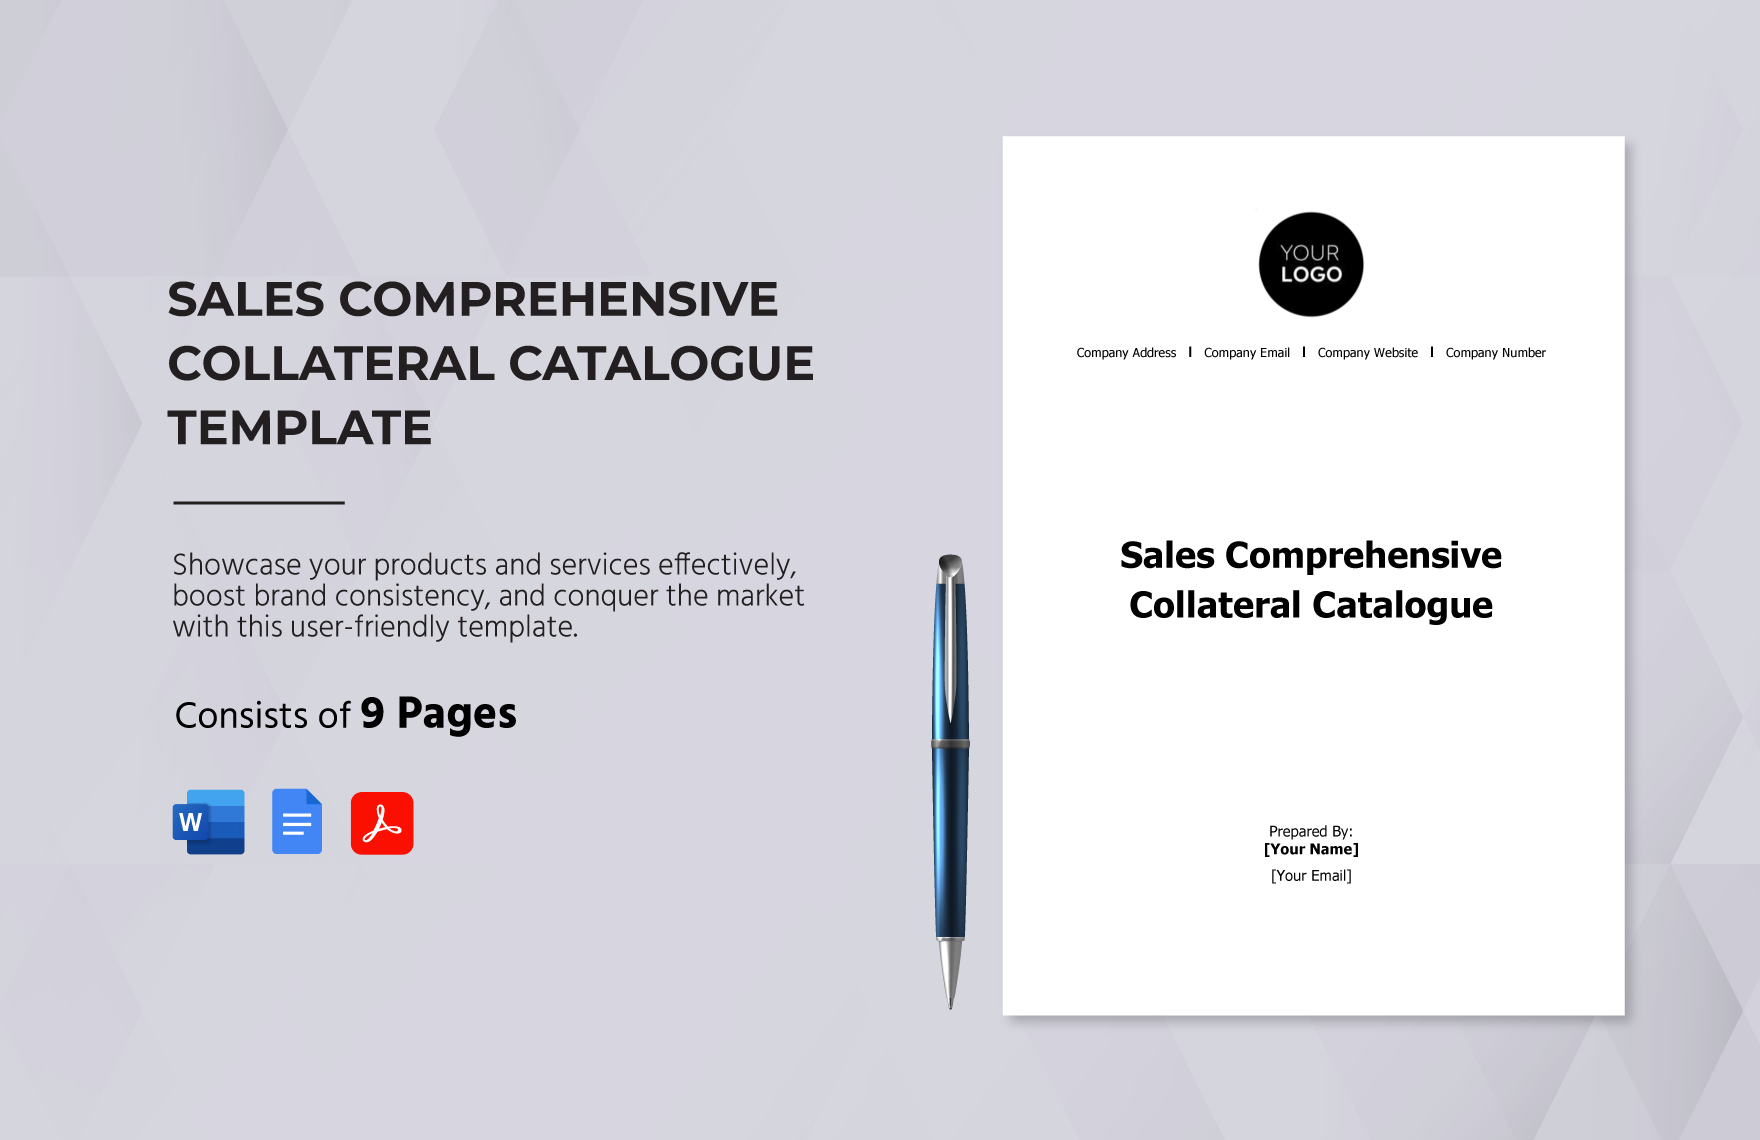 Sales Comprehensive Collateral Catalogue Template in Word, Google Docs, PDF